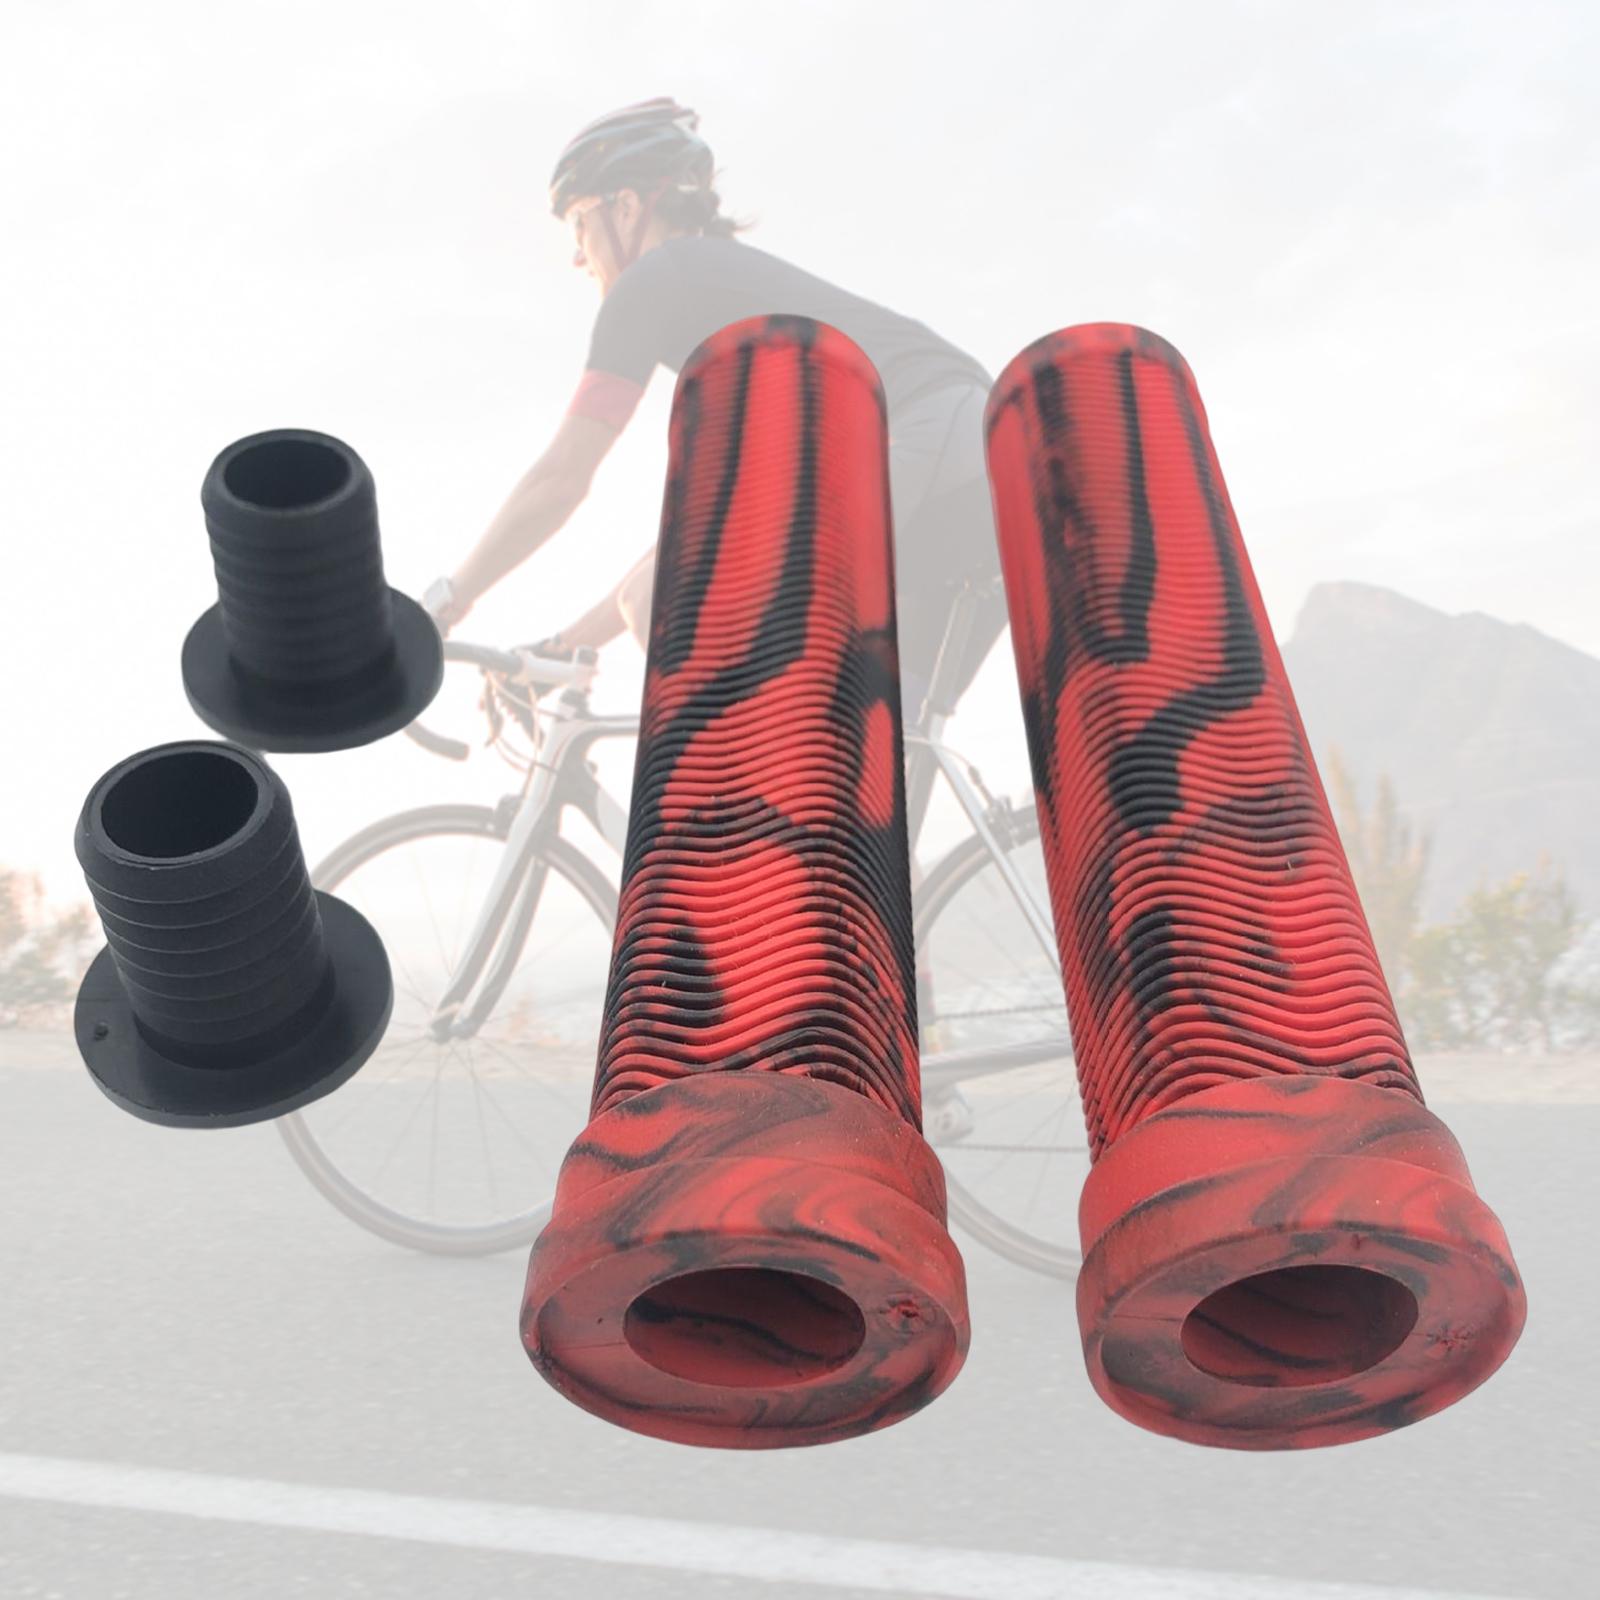 2x Soft Handlebar Grips Sleeve Anti-Skid Comfortable for BMX Sports Cycling Red